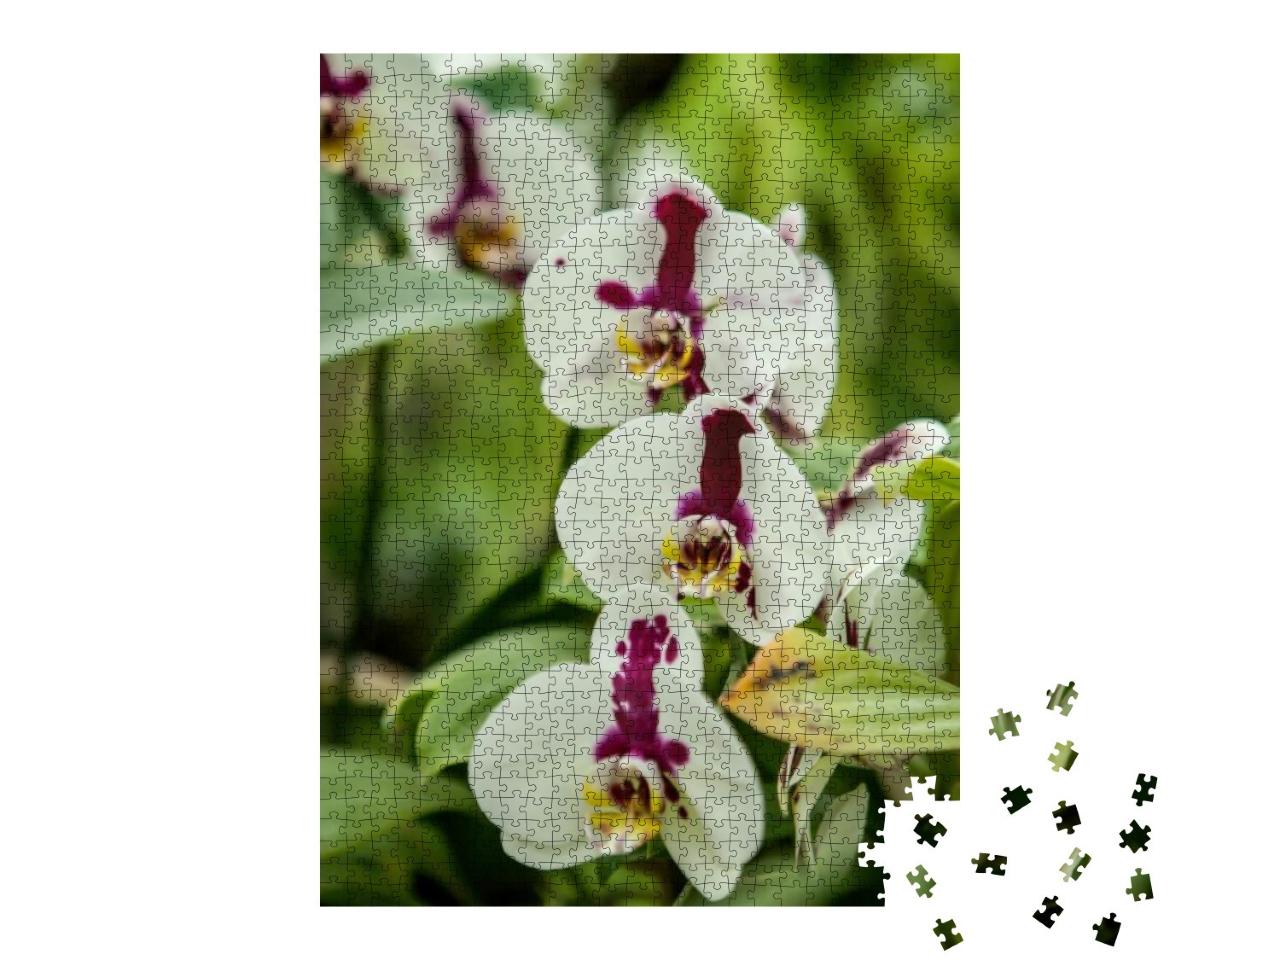 Orchids Bloom in Spring. Spring Bloom of a Variety of Orc... Jigsaw Puzzle with 1000 pieces